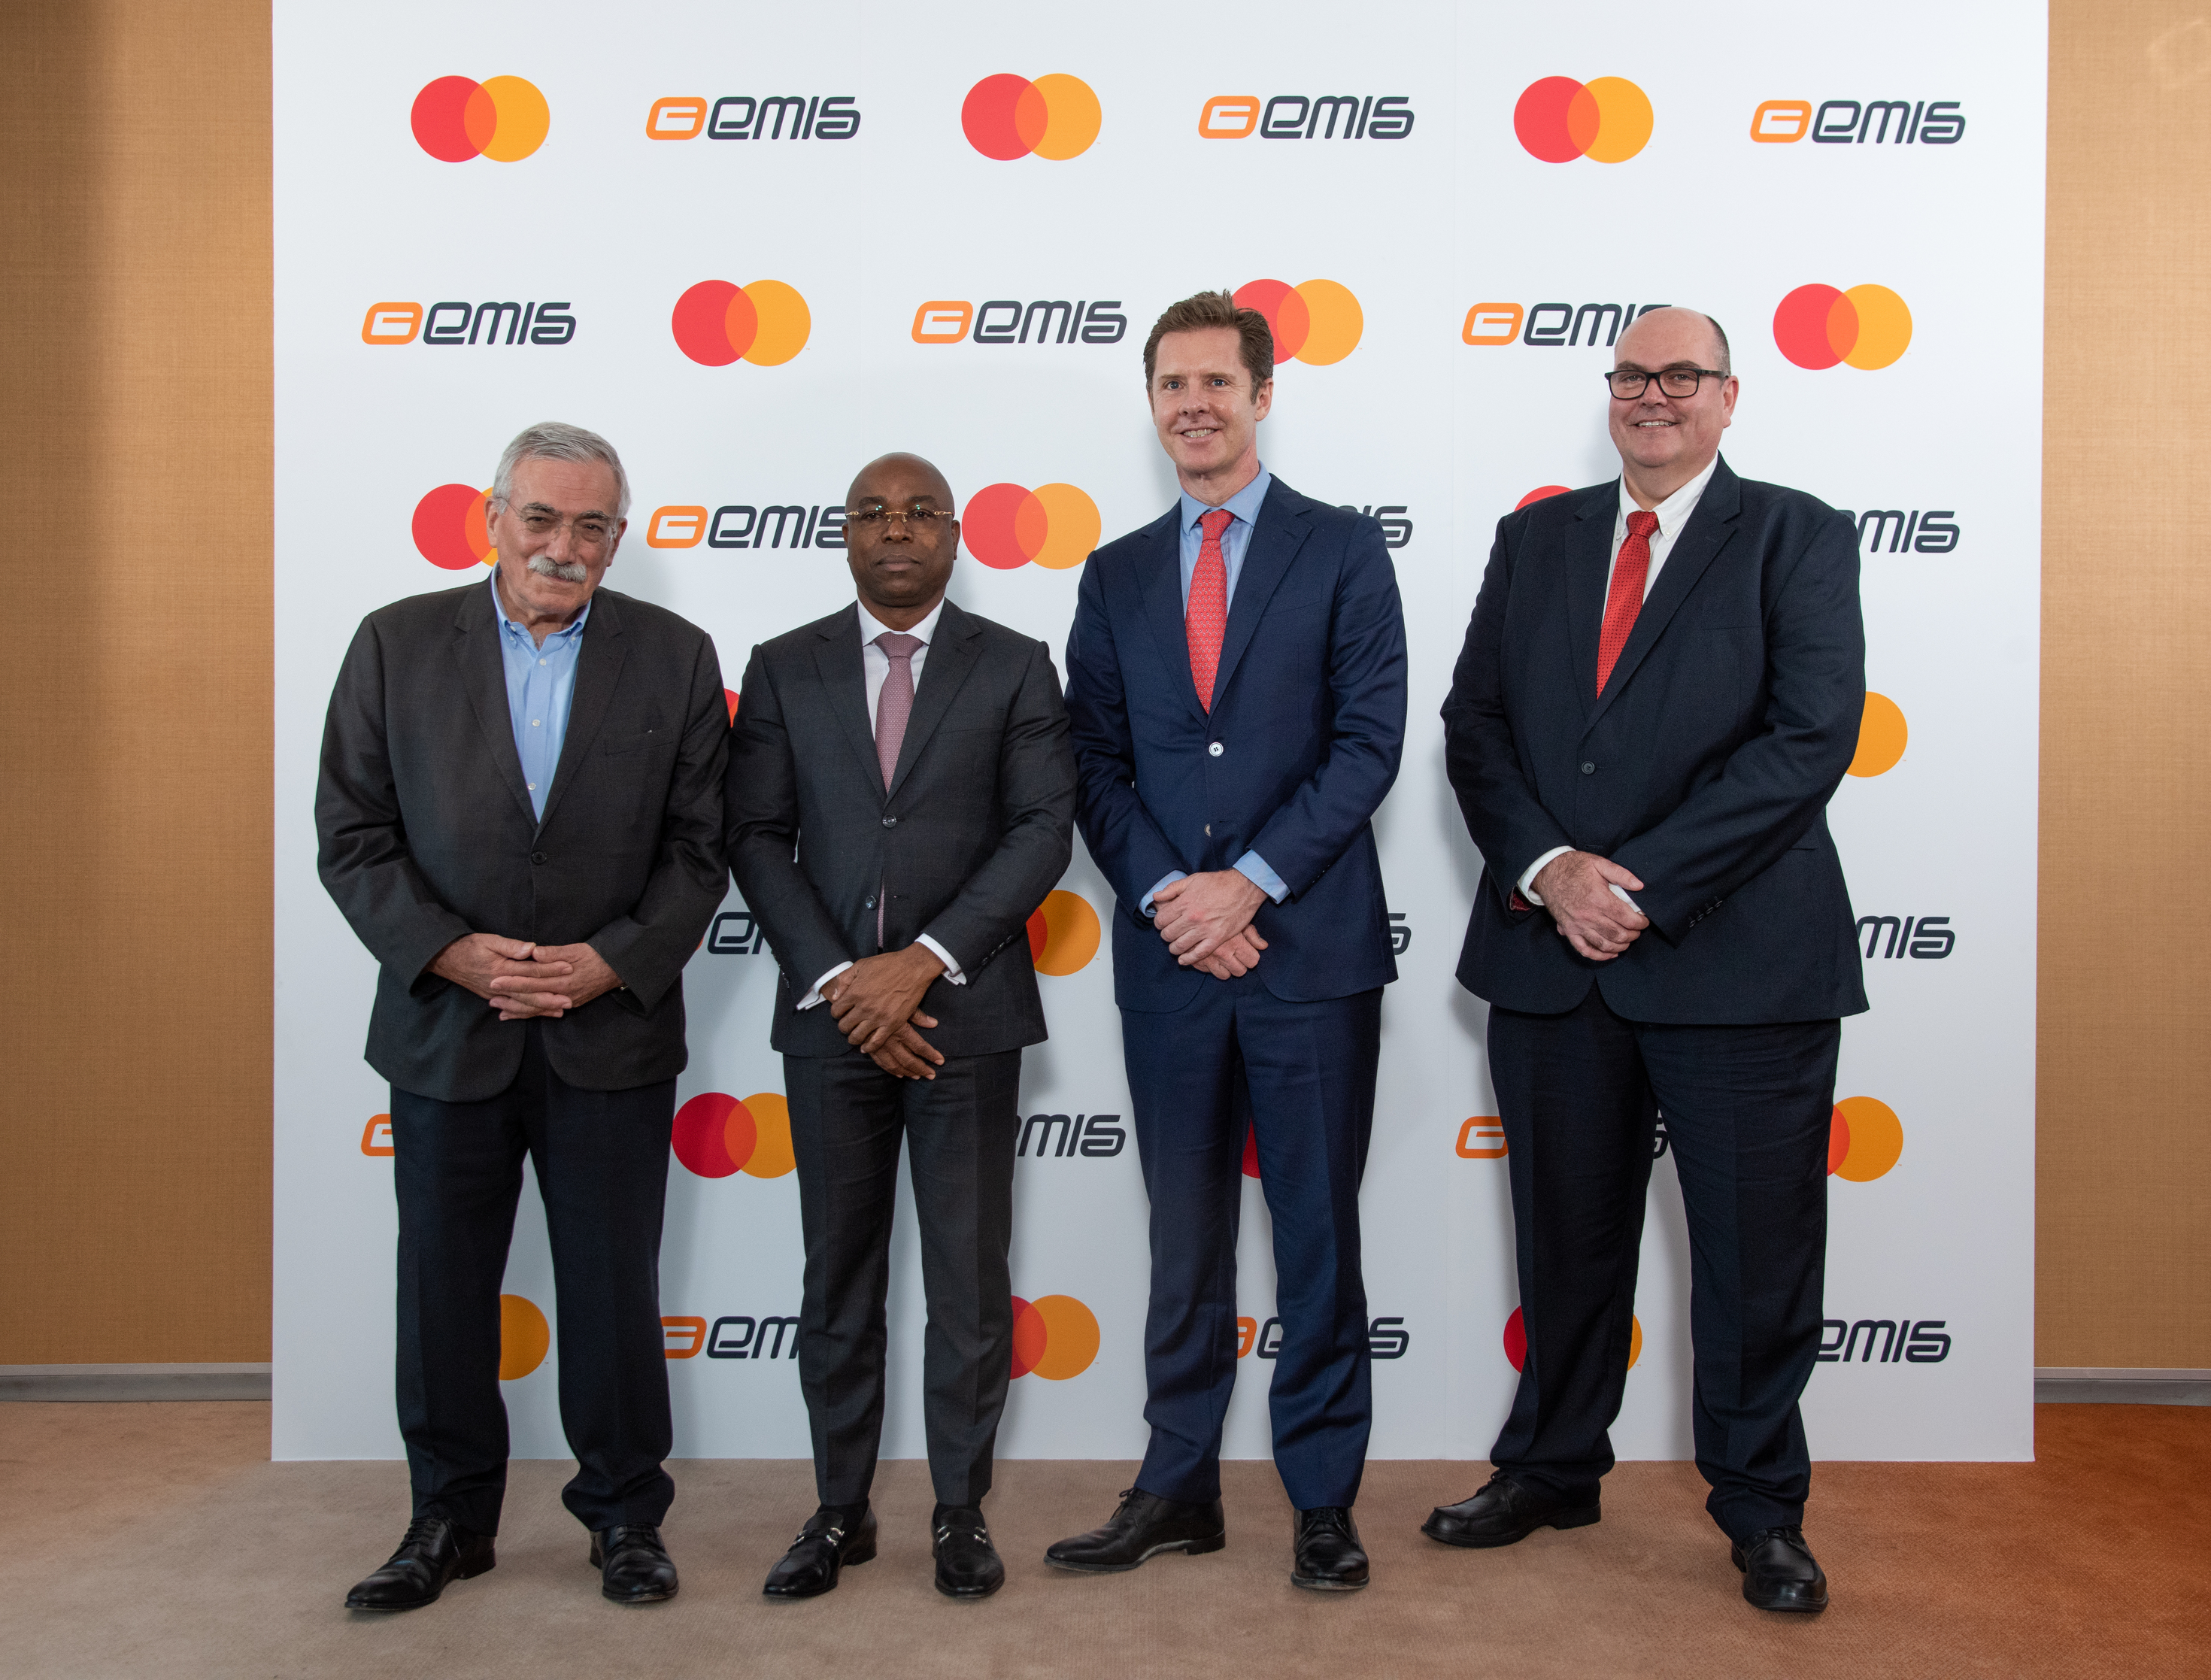 Mark Elliott, Division President, Sub-Saharan Africa at Mastercard (second right), Miguel Bartolomeu Miguel, Executive Director & Board Member at the National Bank of Angola (second left), Gabriel Swanepoel, Country Manager at Mastercard, Southern Africa (far right) and Eng Jose de Matos, CEO, EMIS Angola (far left) during the signing of the Memorandum of Understanding between Mastercard, EMIS Angola and the National Bank of Angola.